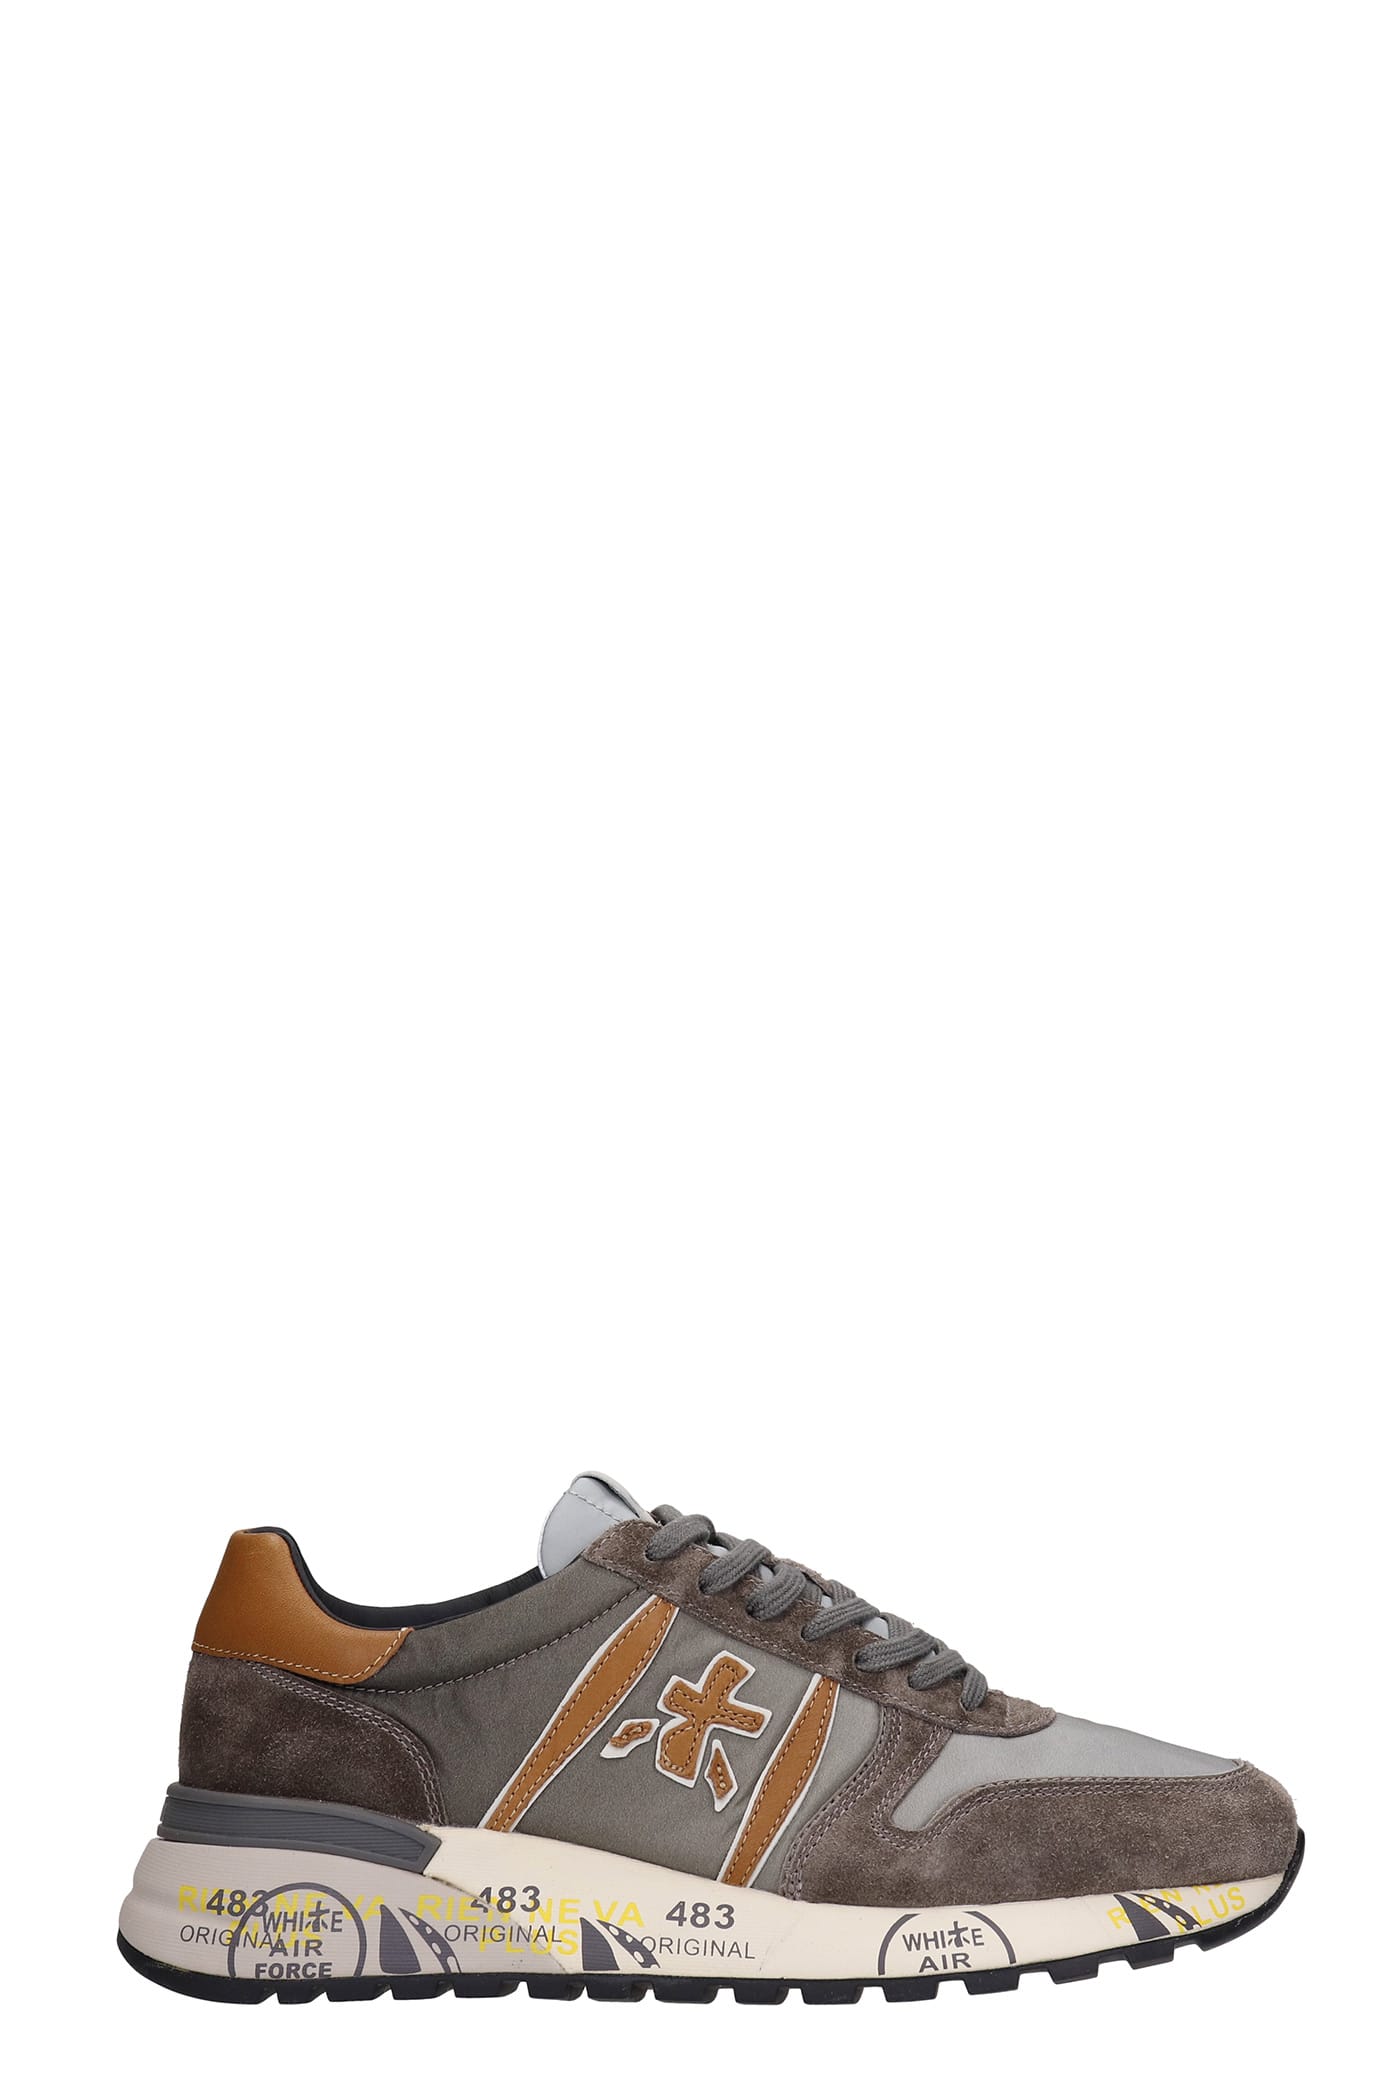 Premiata Lander Sneakers In Taupe Suede And Fabric